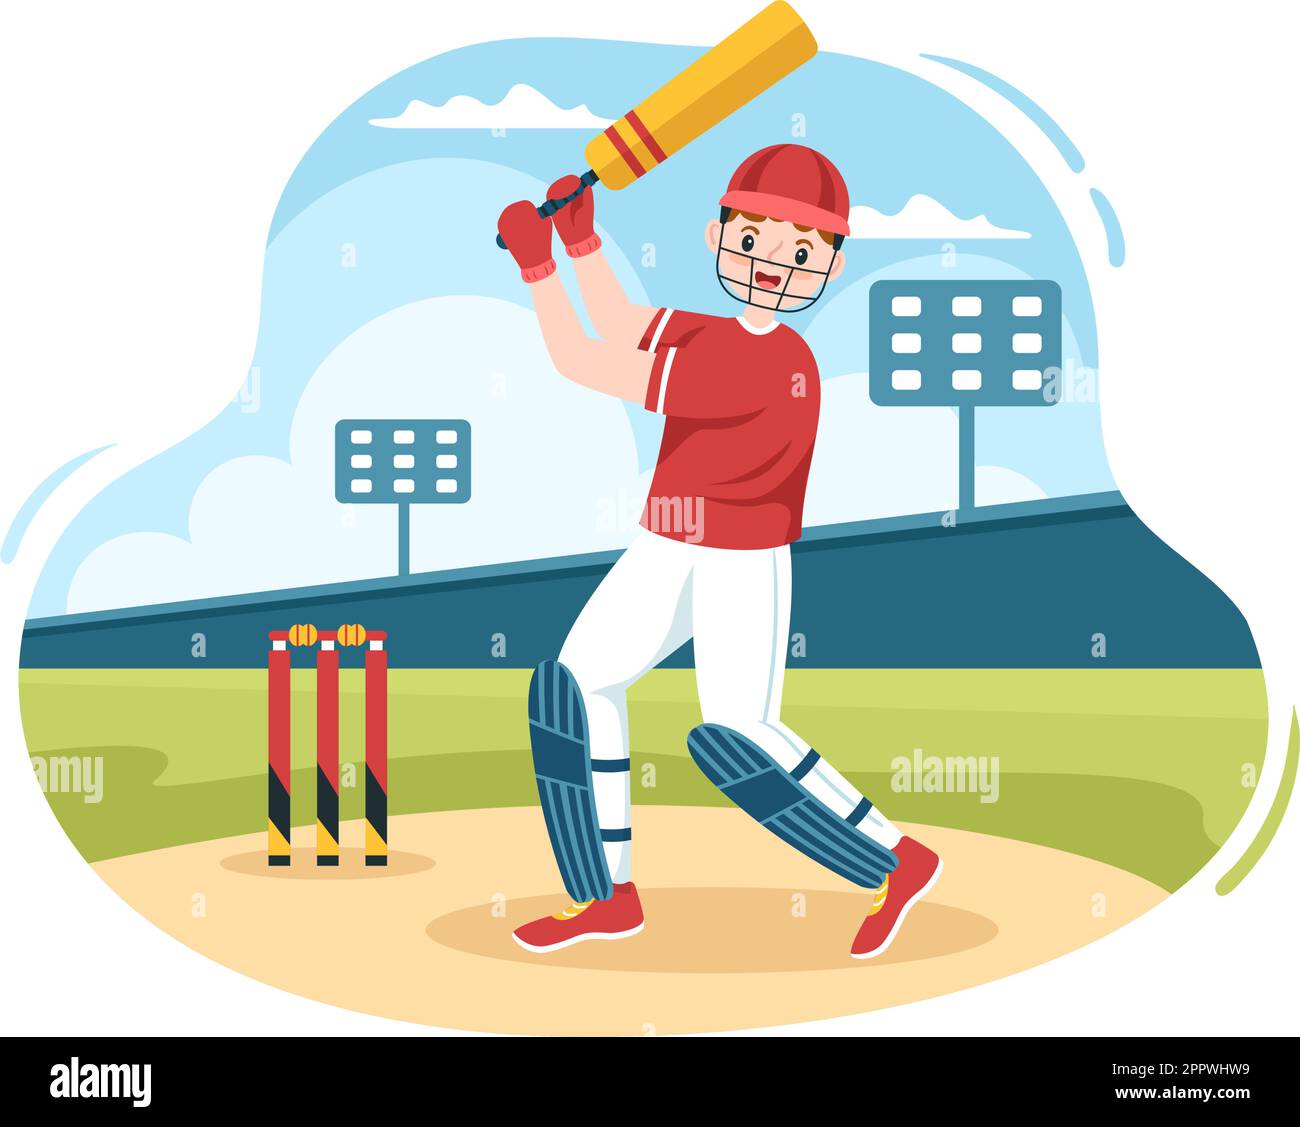 Batsman Playing Cricket Sports with Ball and Stick in Flat Cartoon Field Background Illustration Stock Vector